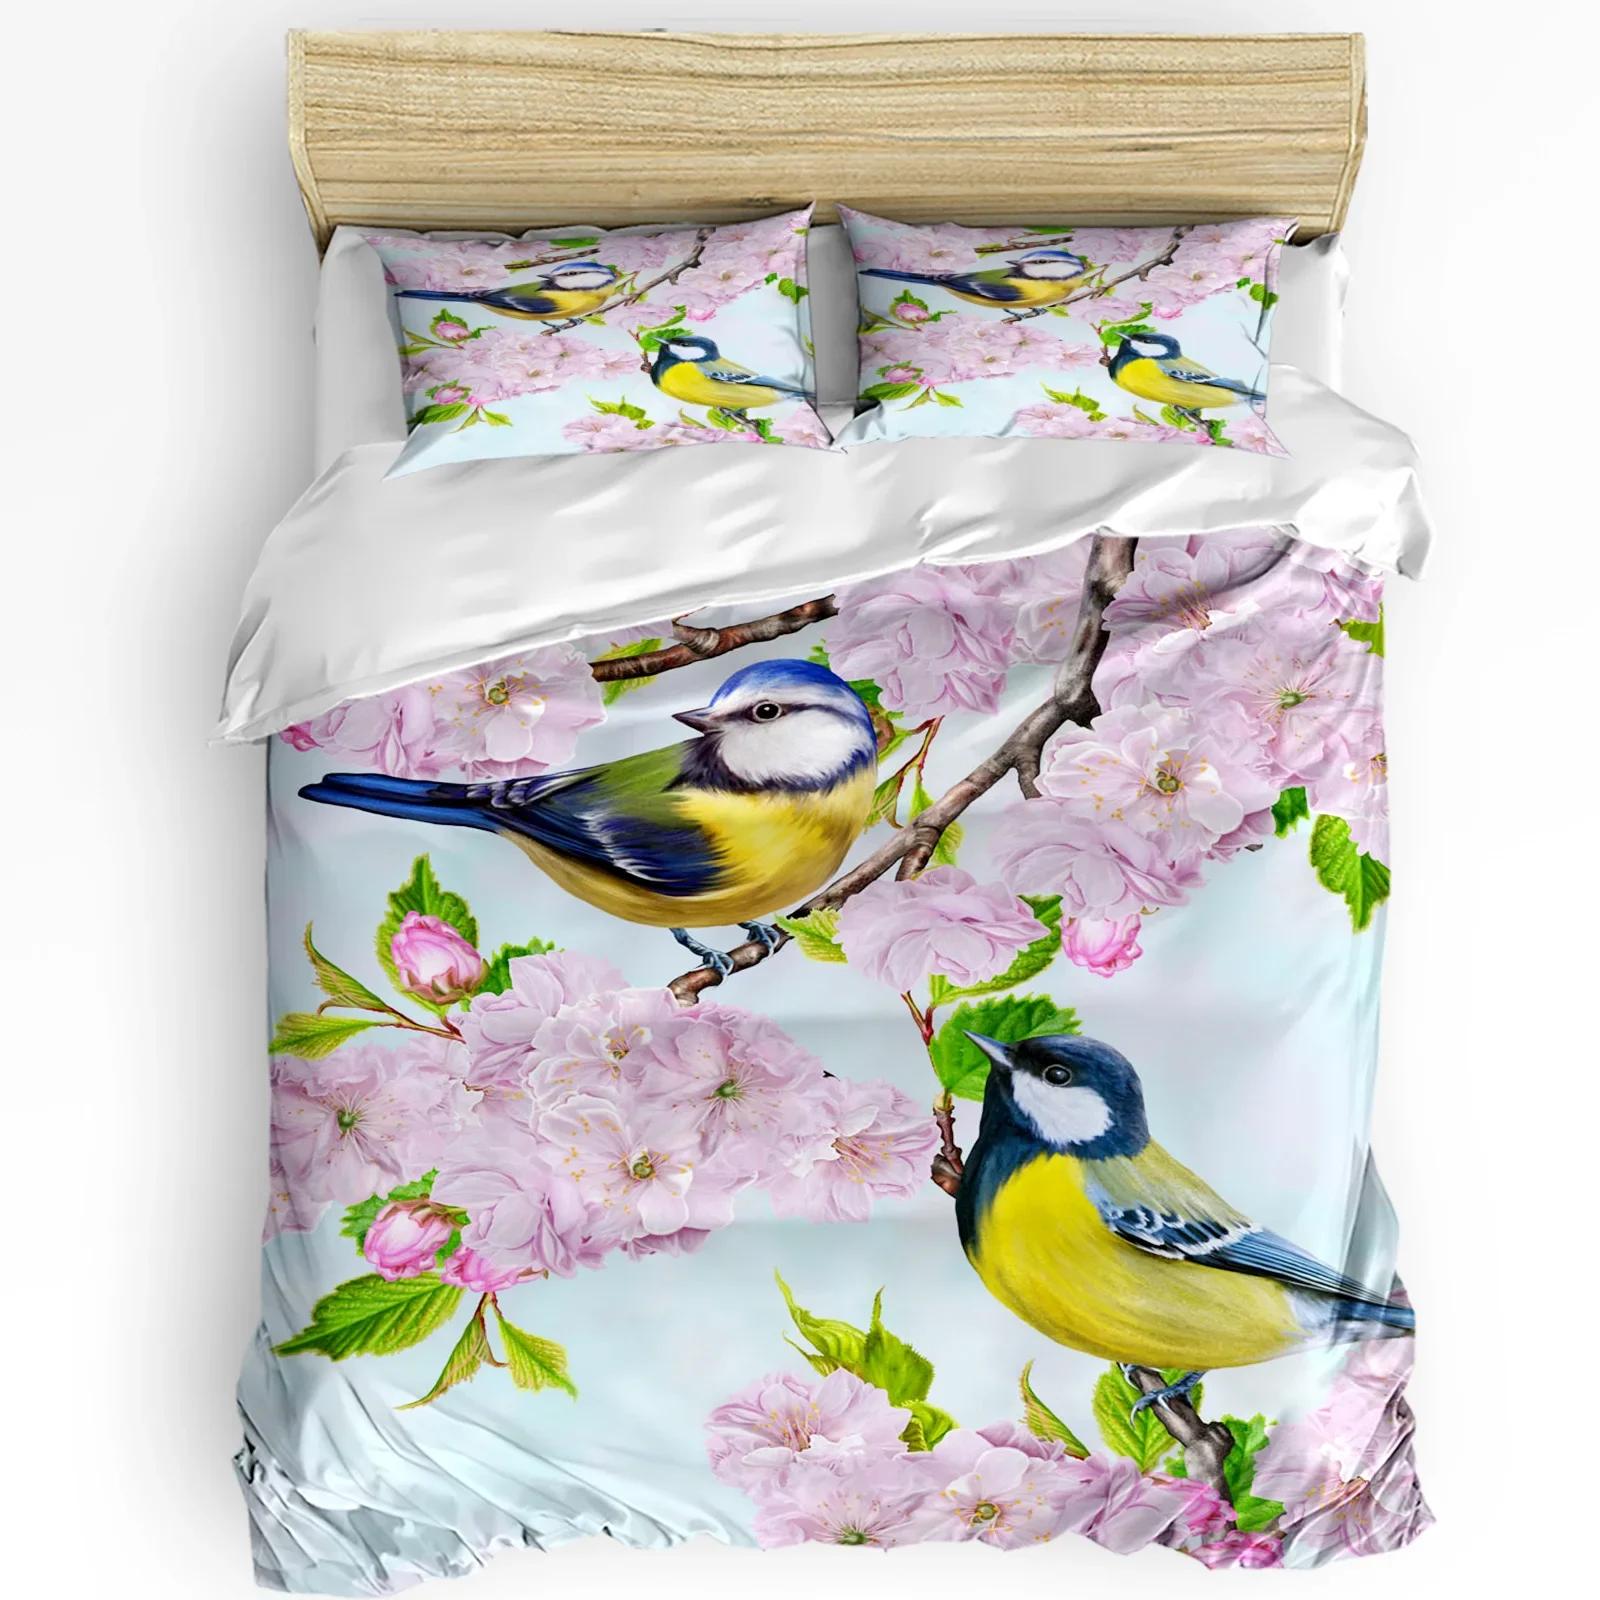 Animal Bird Flowers Leaves Branch Plant 3pcs Bedding Set For Bedroom Double Bed Home Textile Duvet Cover Quilt Cover